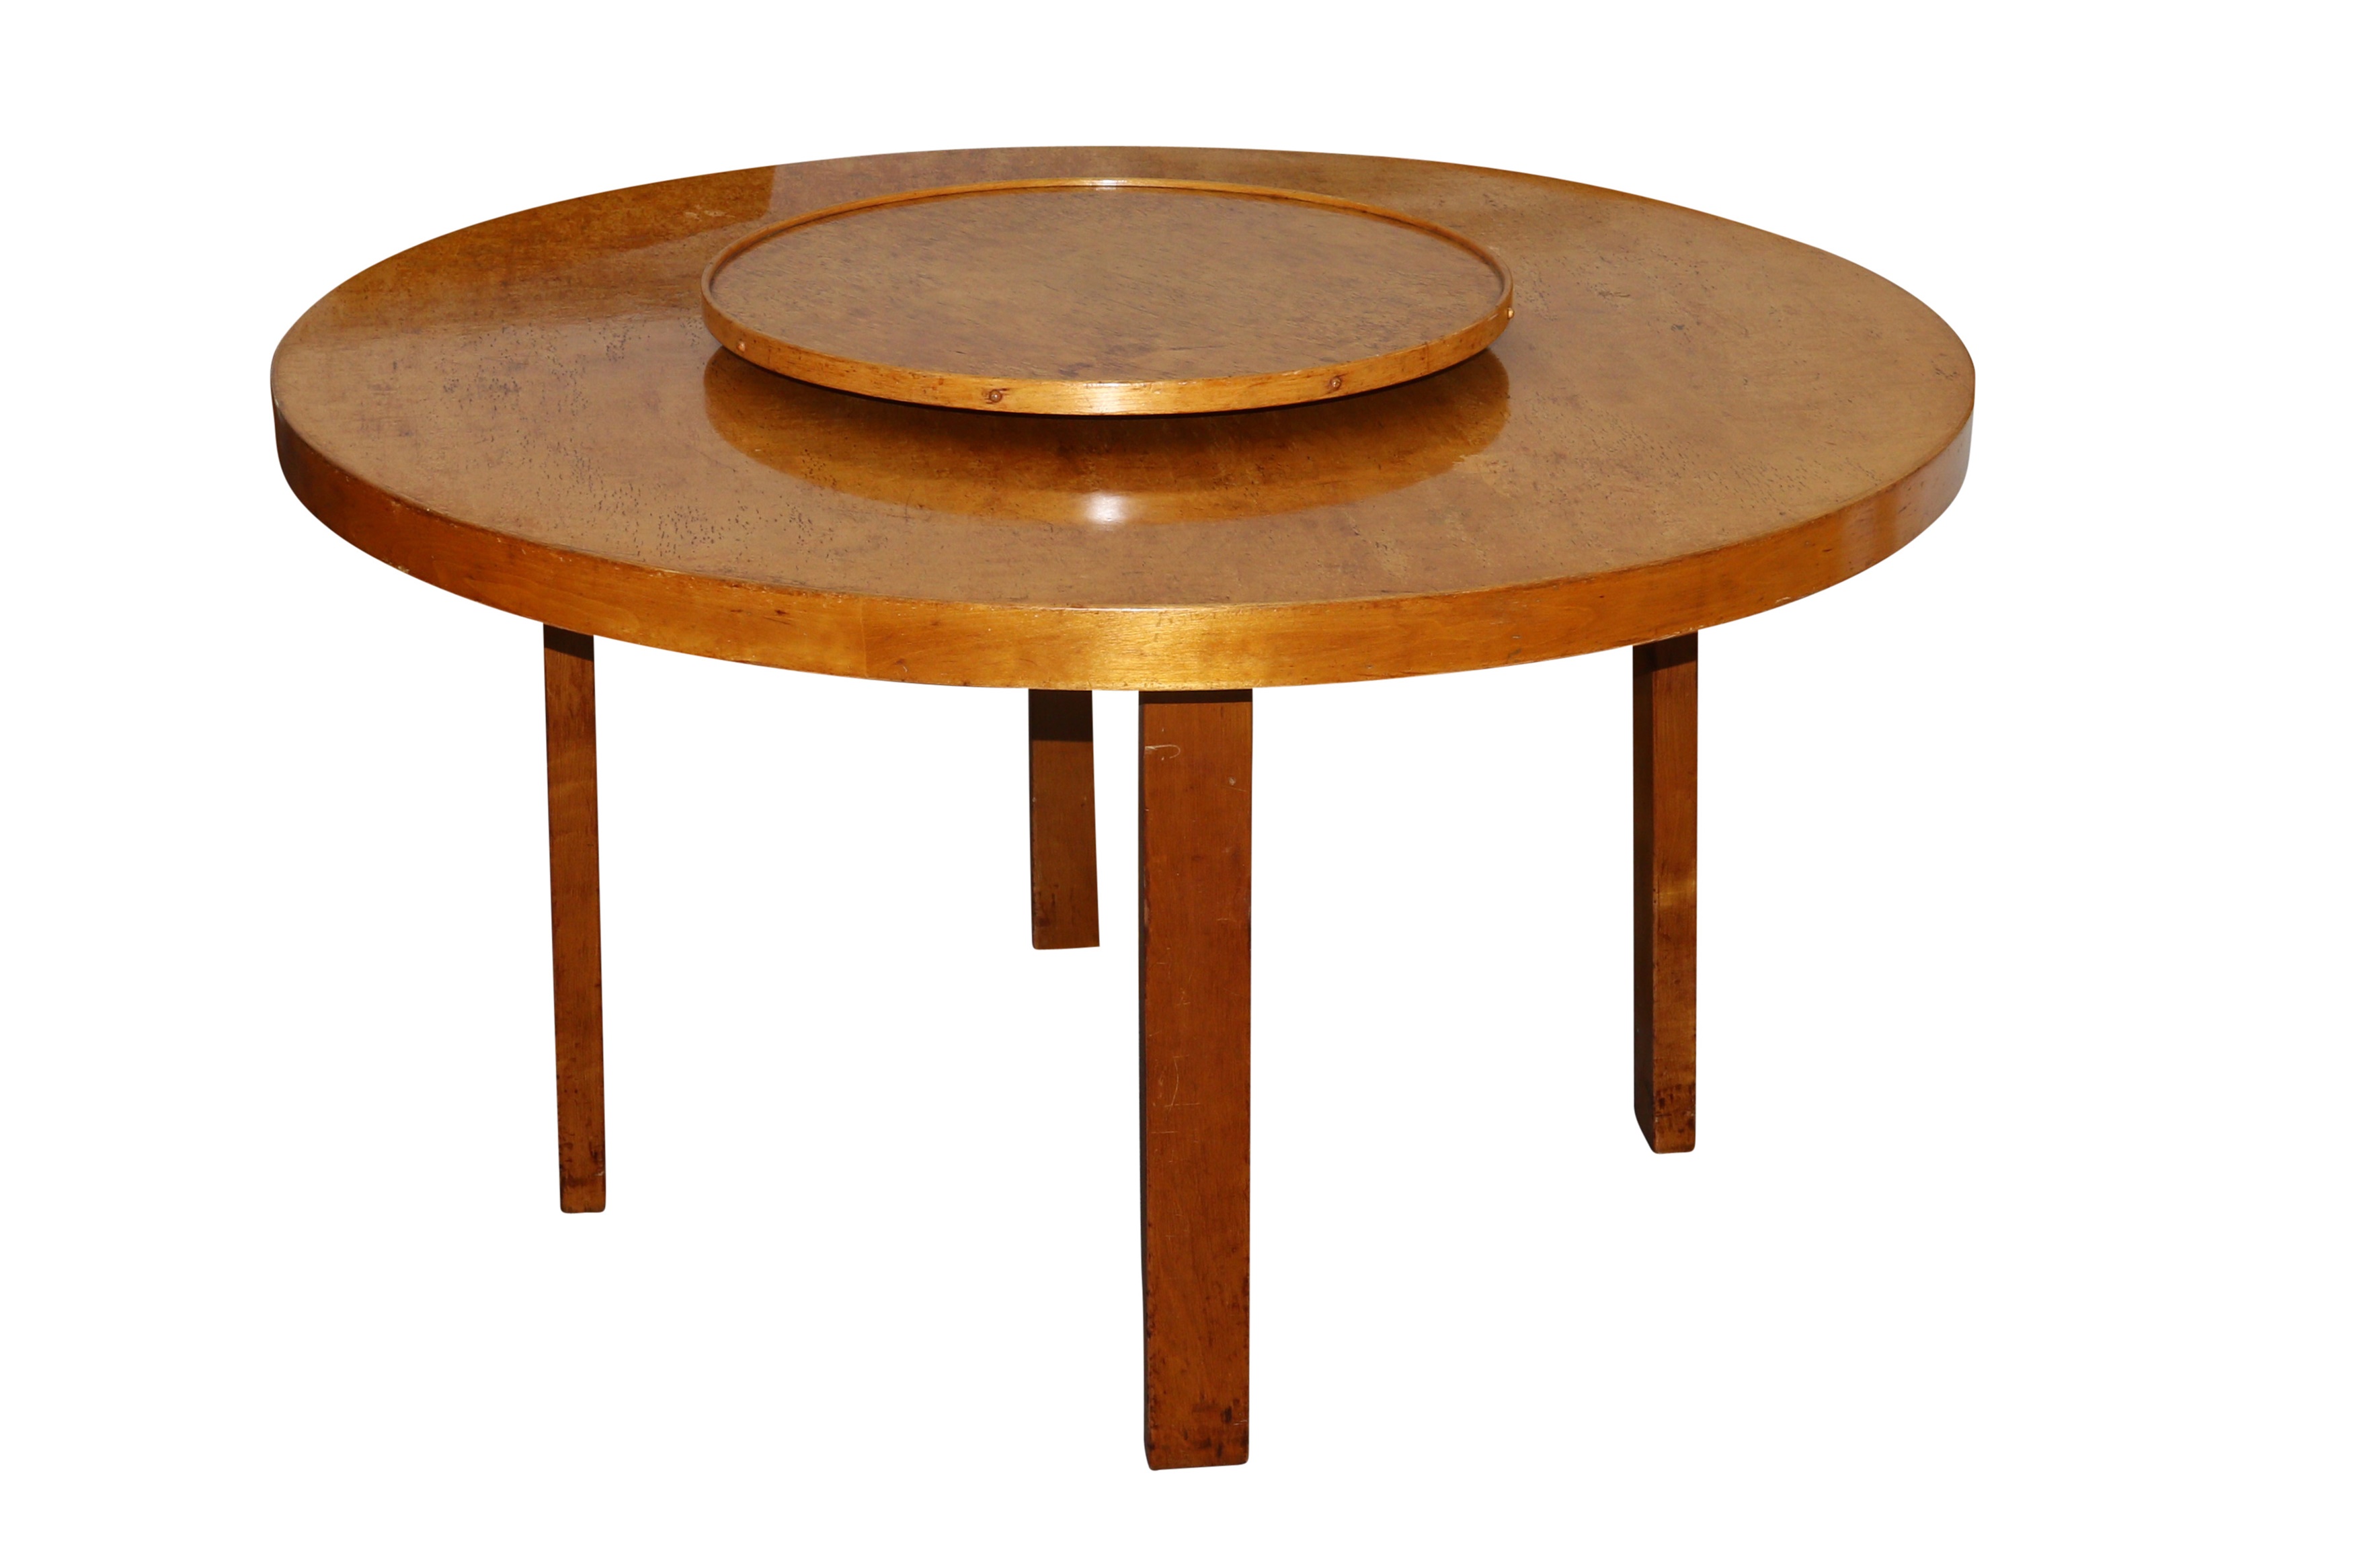 ALVAR AALTO FOR FINMAR LTD, FINLAND: Table 91 with lazy susan - Image 2 of 2